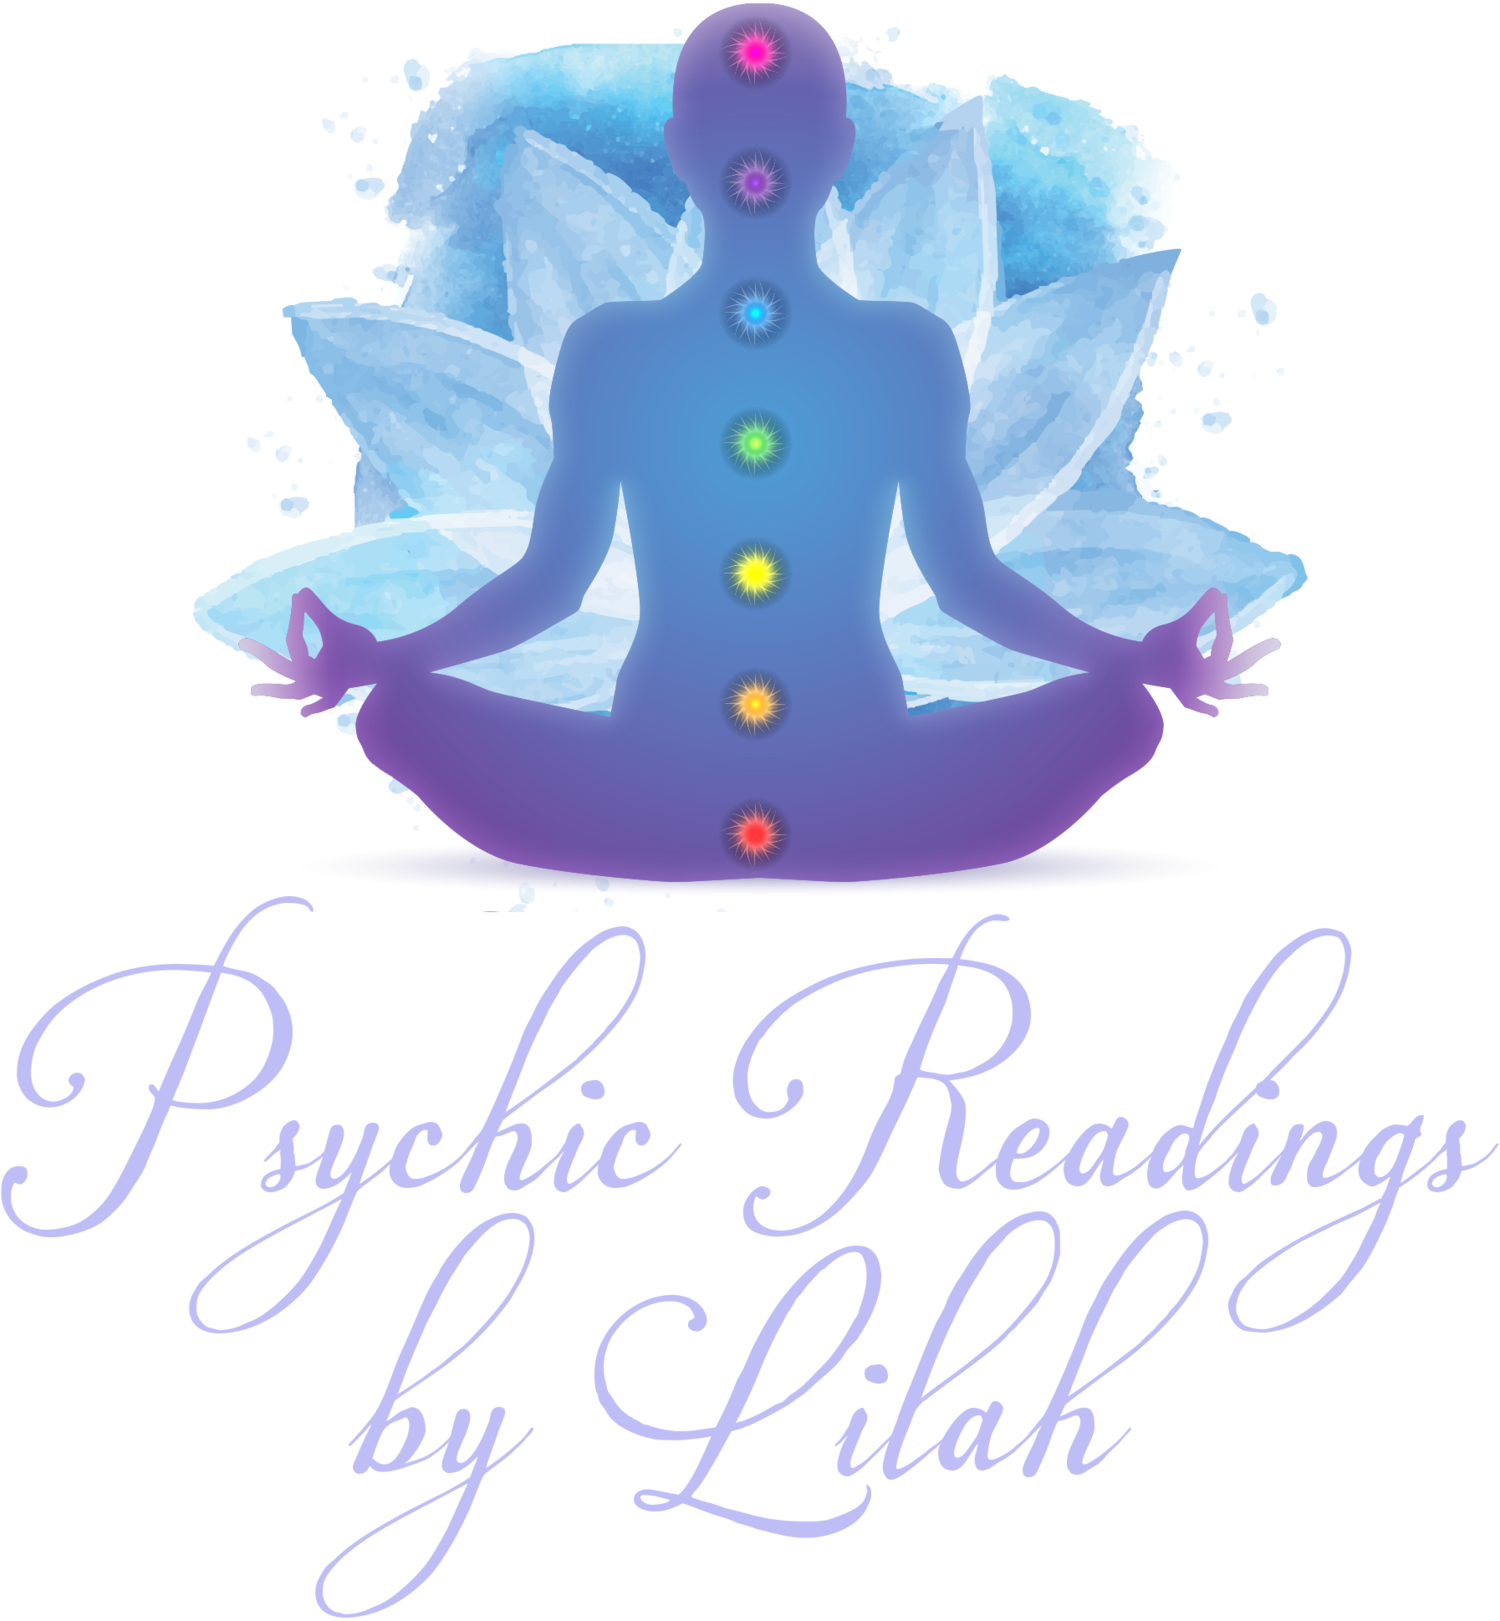 Psychic Readings by Lilah